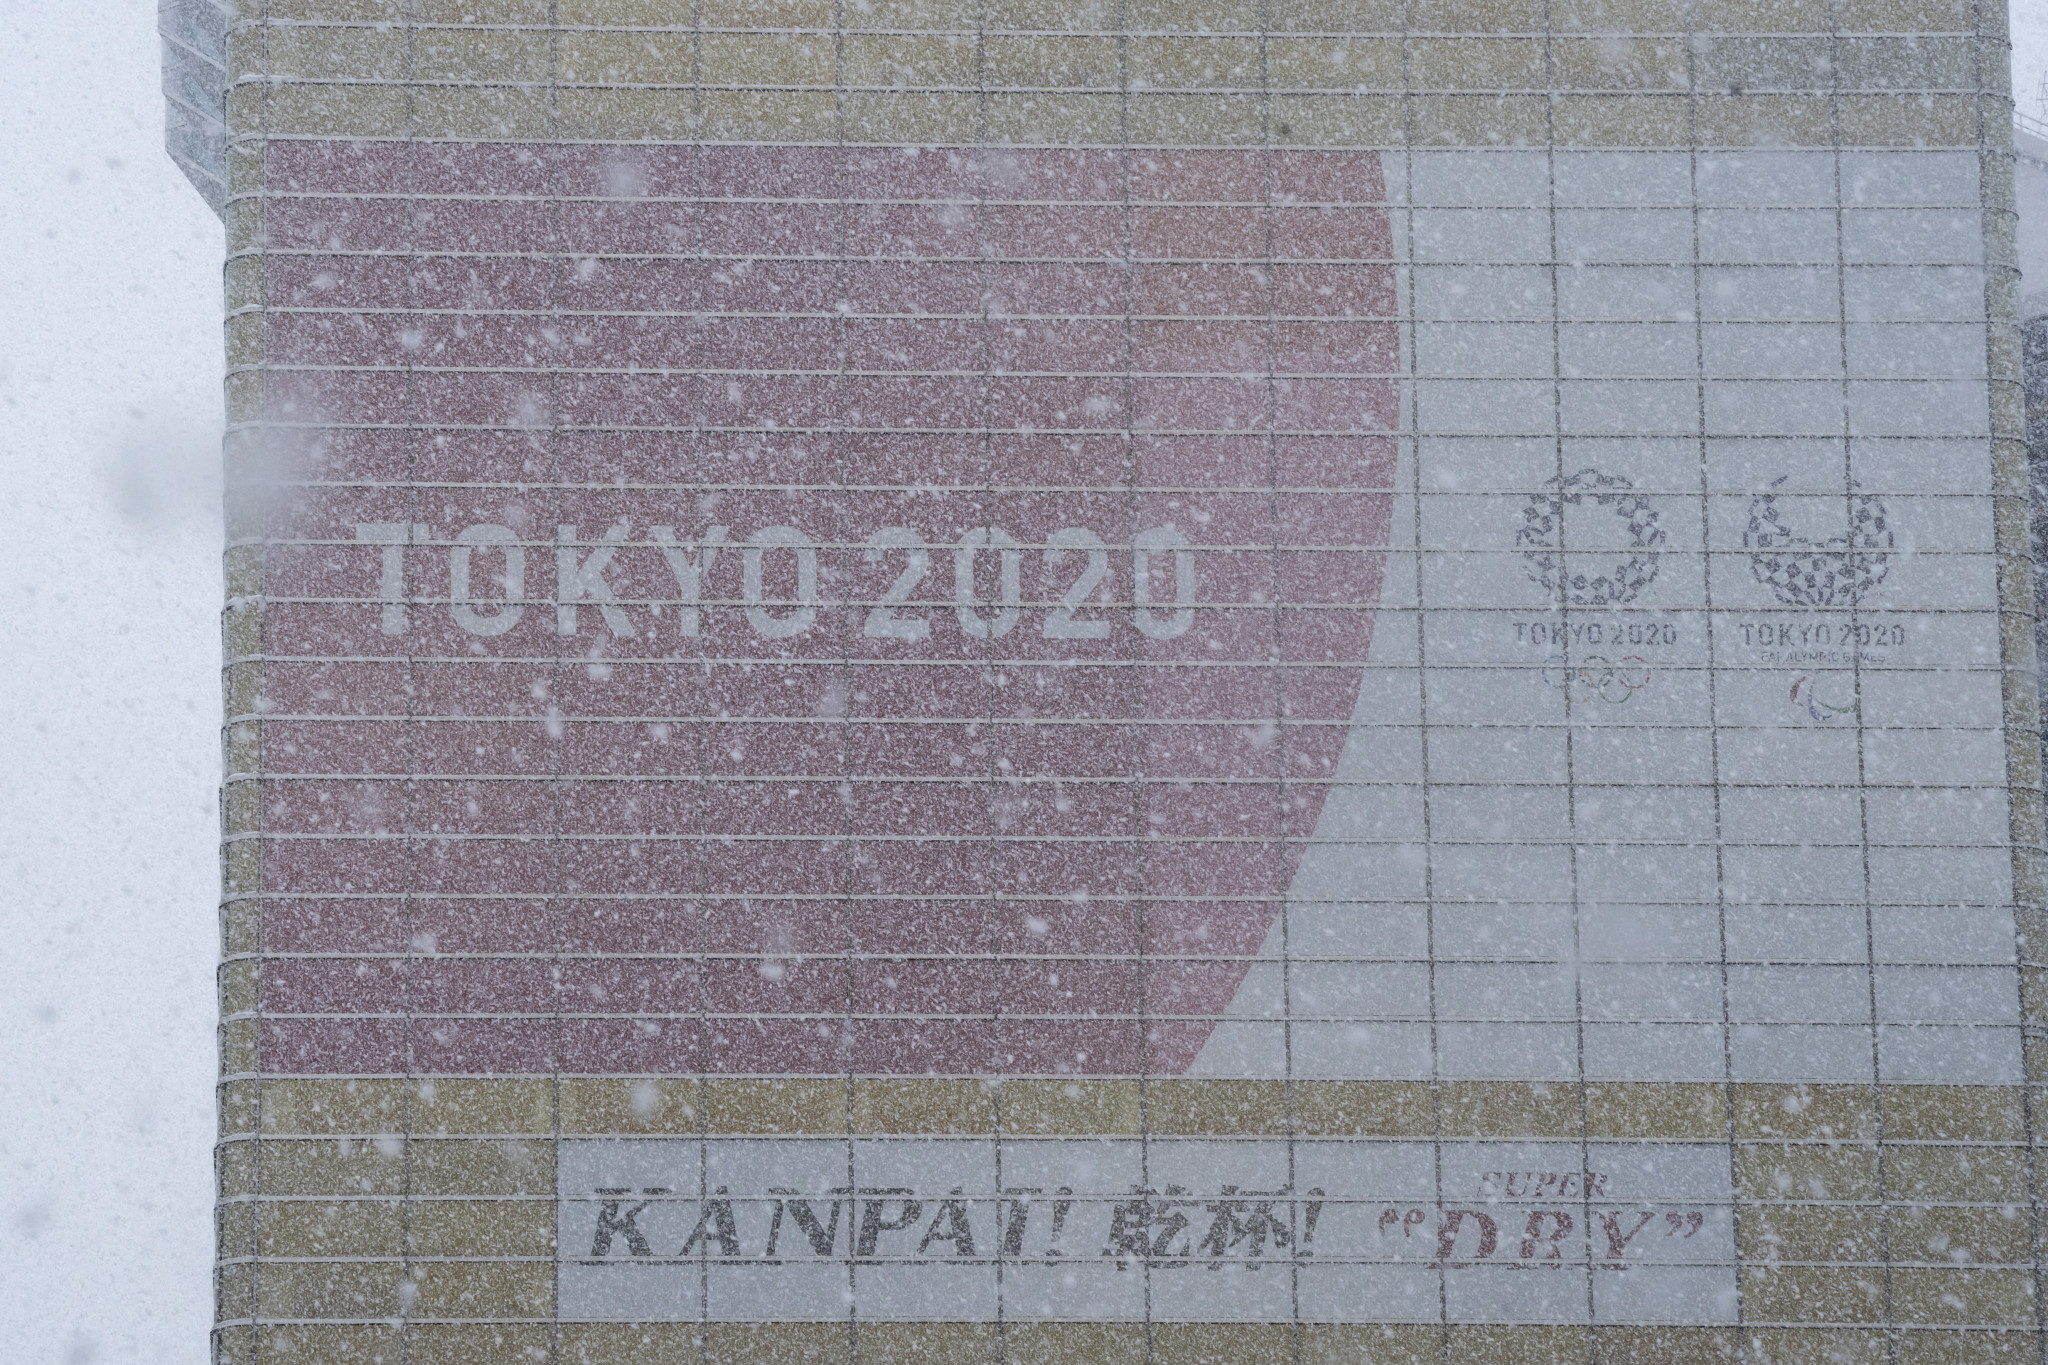 Tokyo 2020 face the challenge of planning for a postponed Olympic and Paralympic Games ©Getty Images